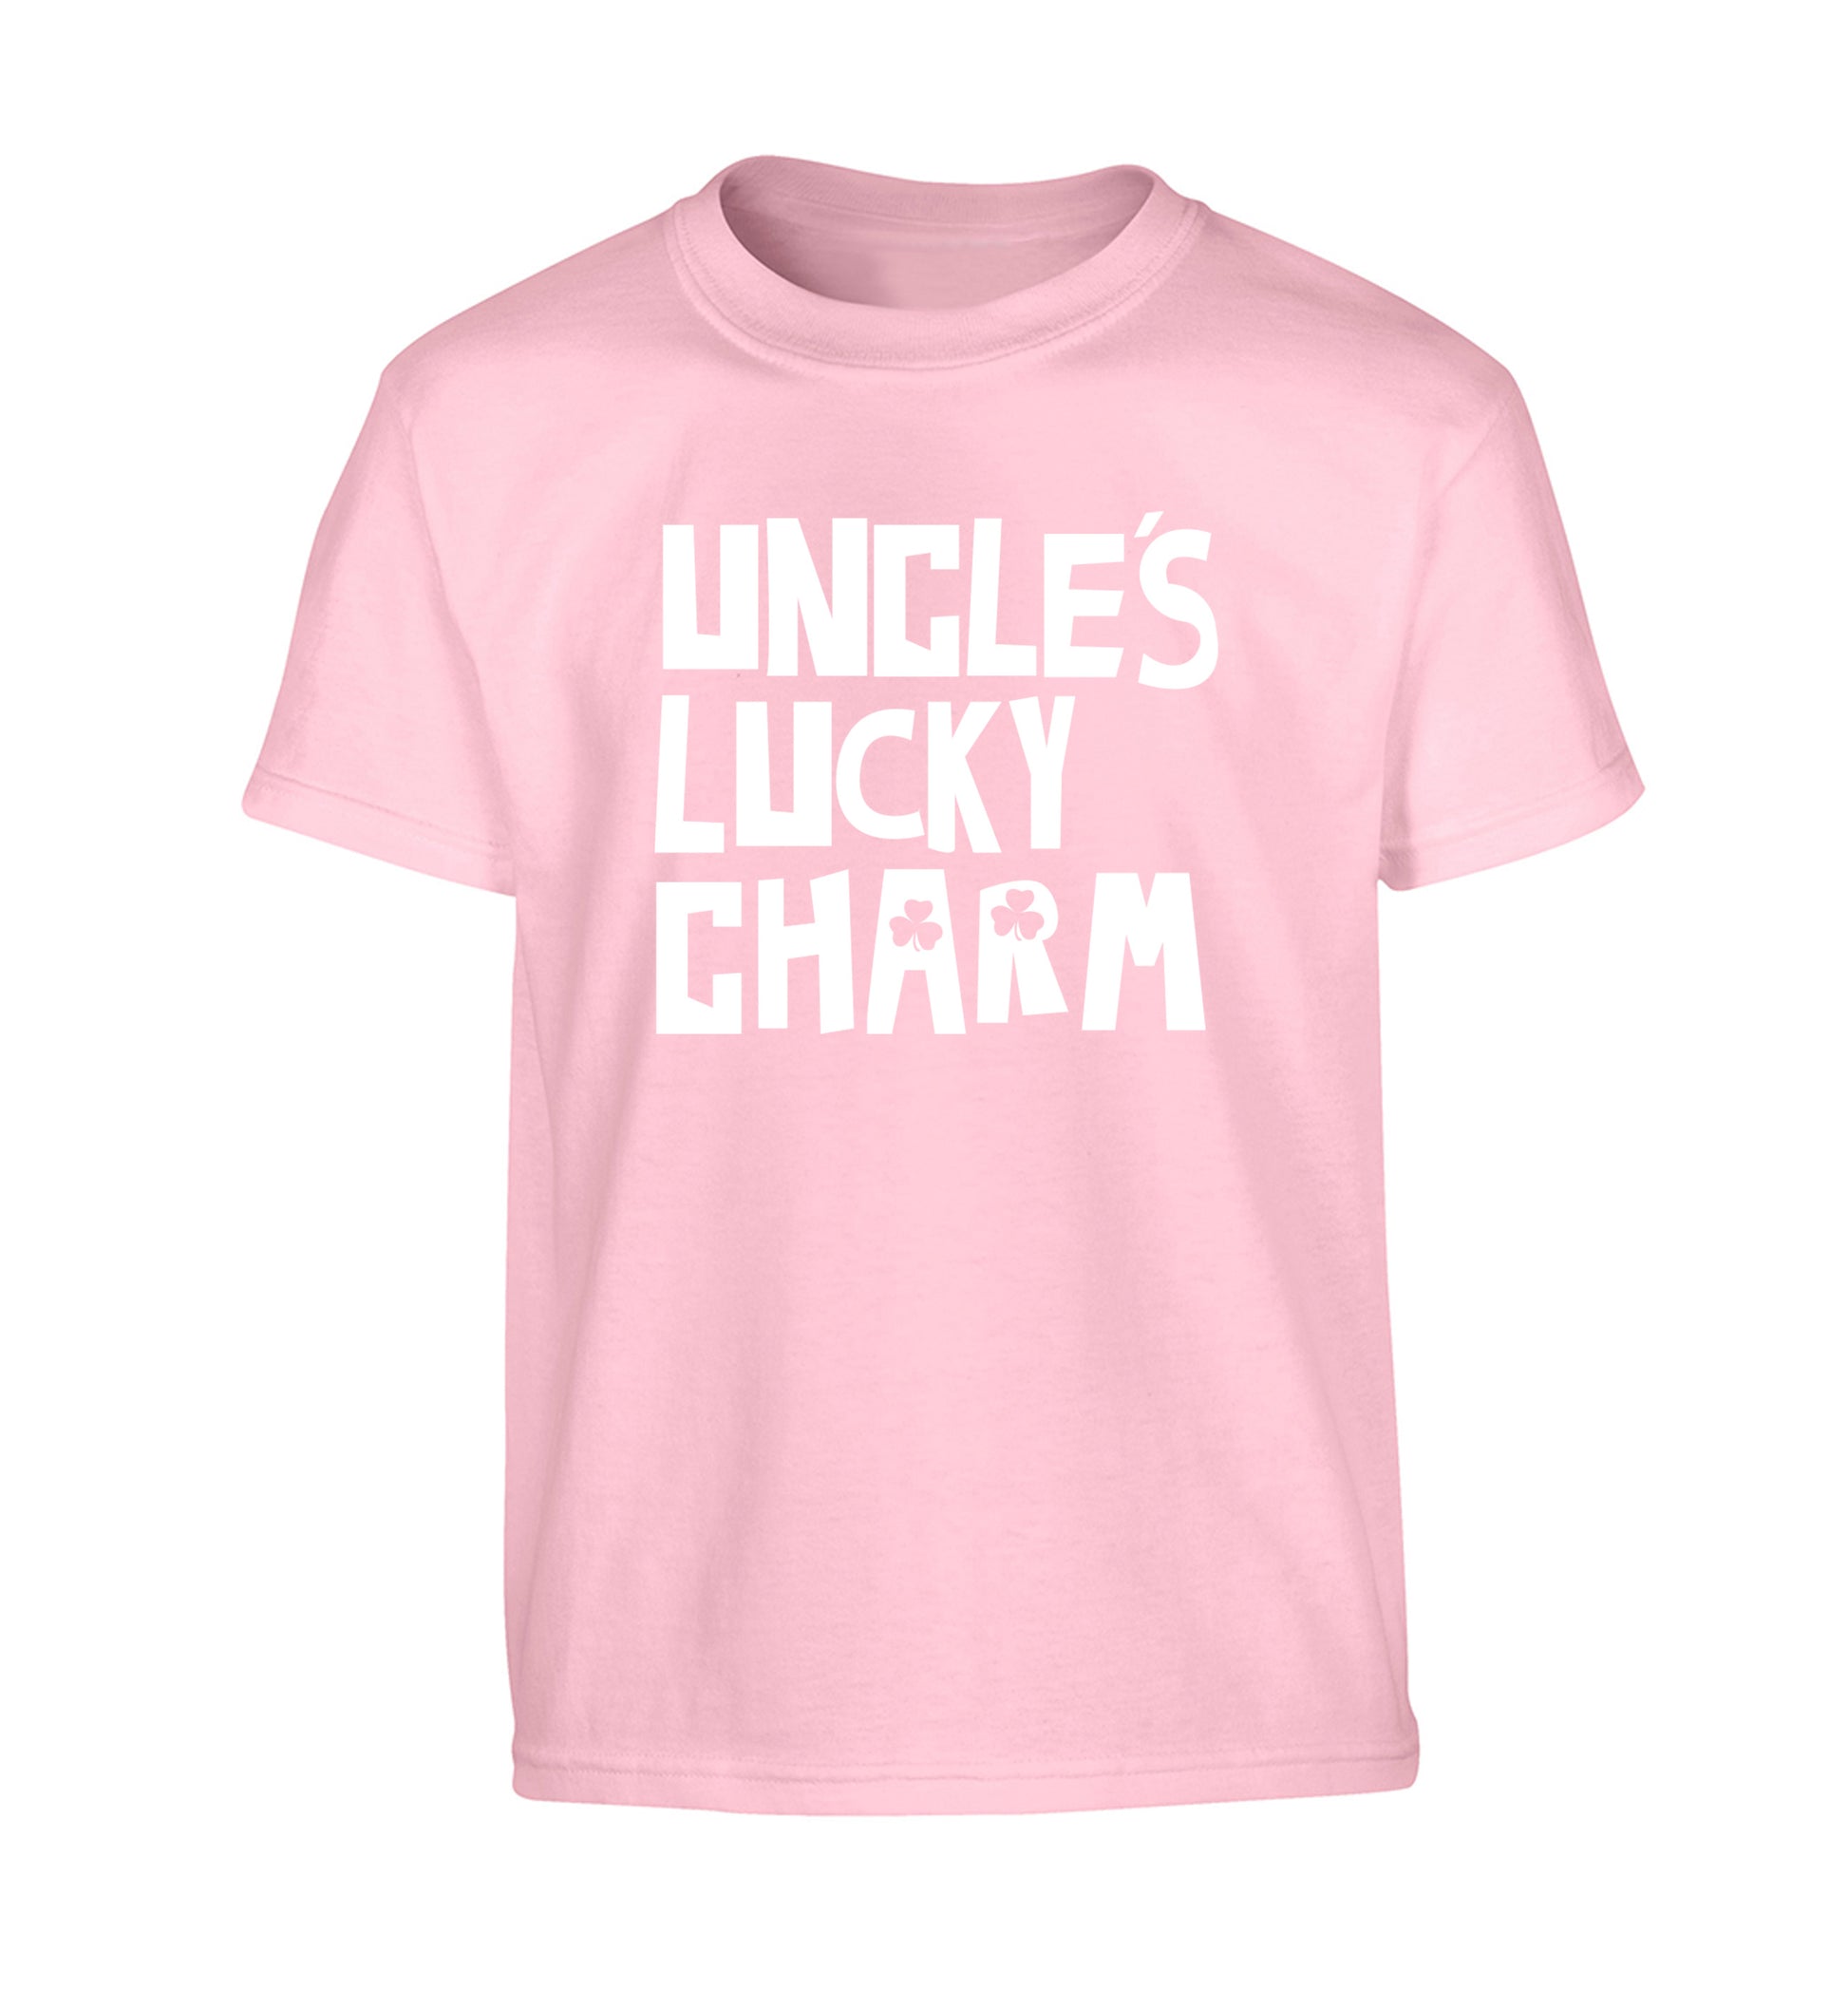 Uncles lucky charm Children's light pink Tshirt 12-13 Years